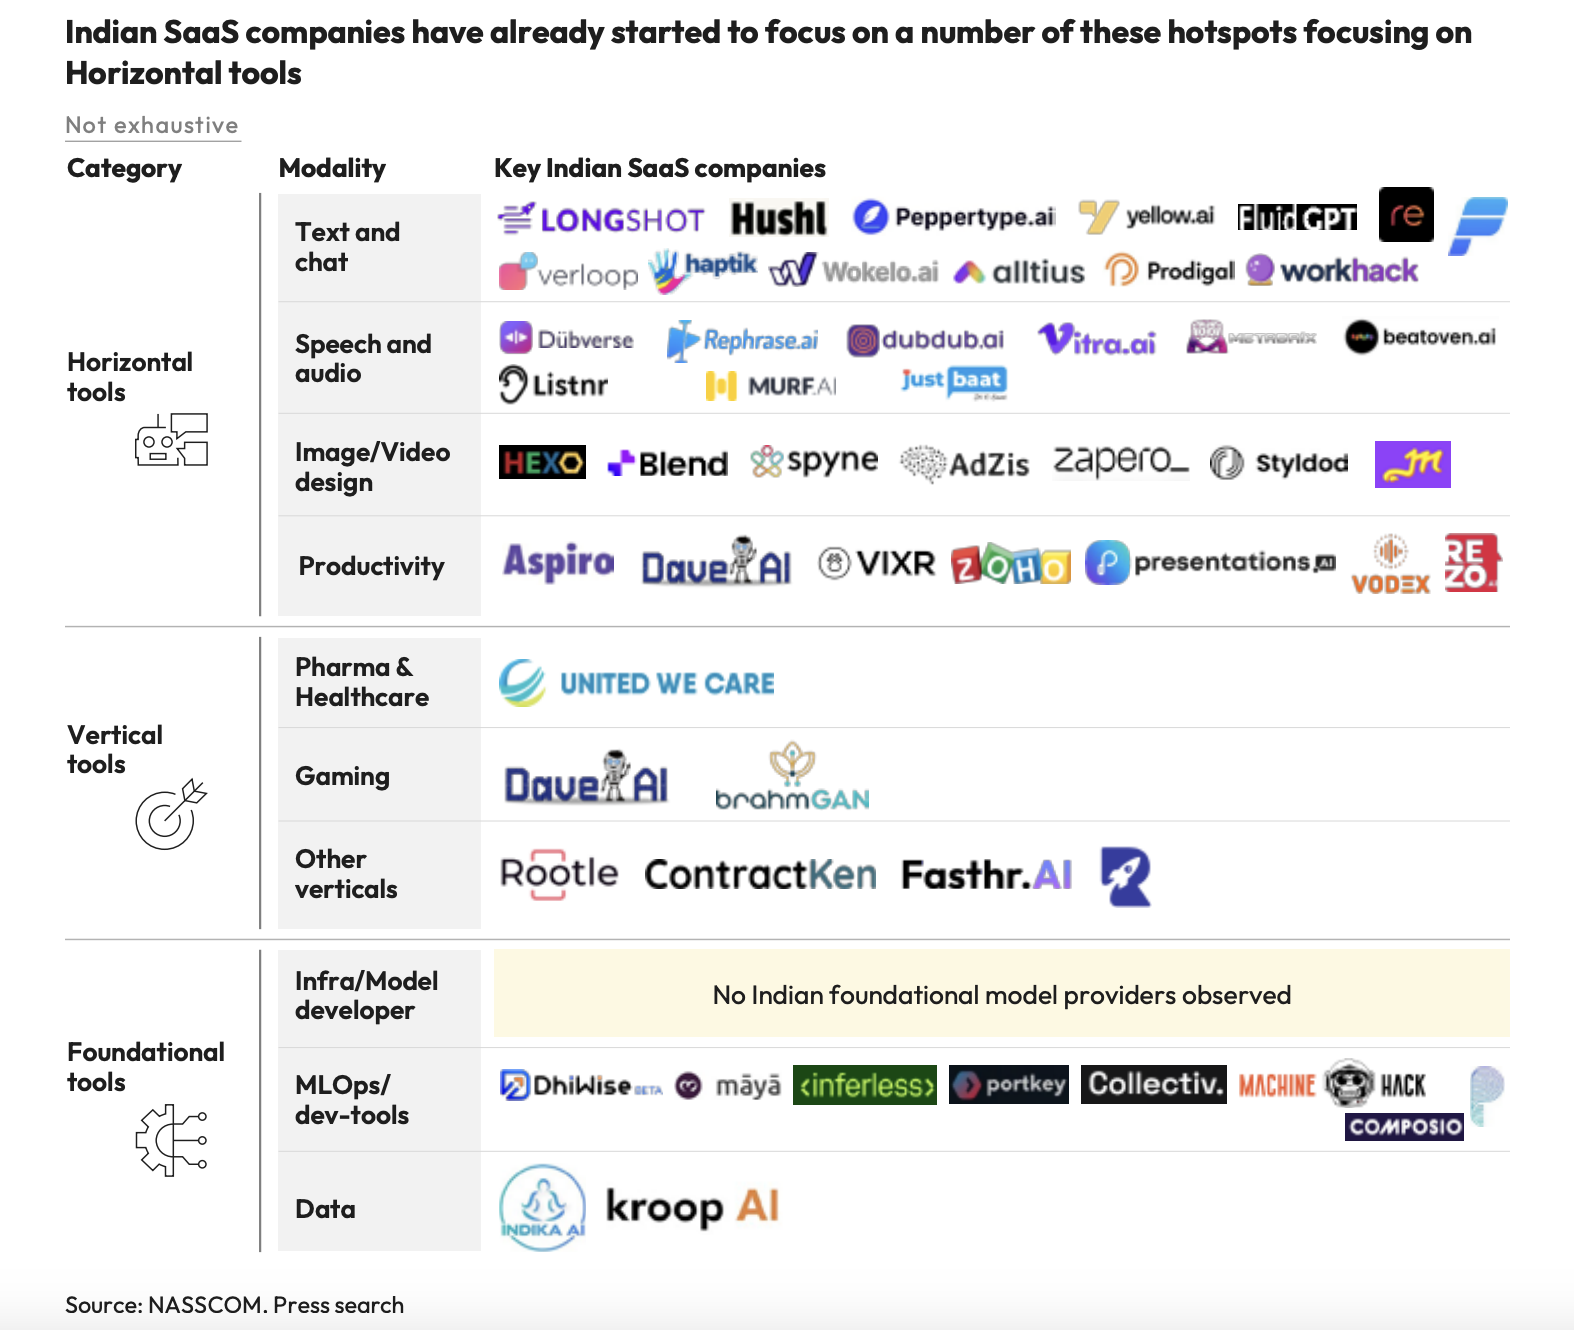 Key Indian SaaS Companies and the category of tools they've begun focusing on. 